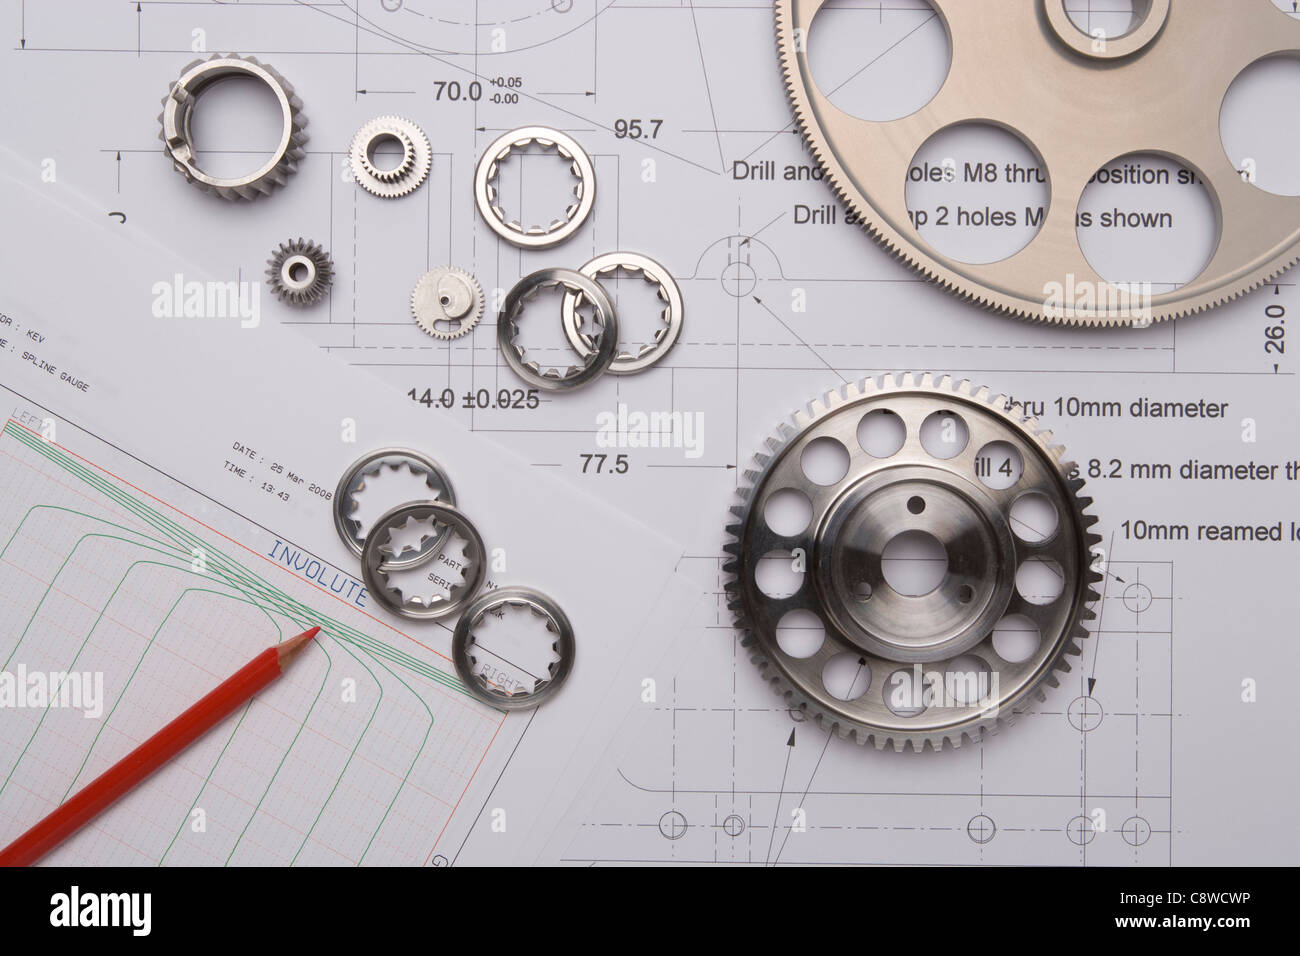 precision cut cogs and gears overlay technical drawings and quality control data and paperwork Stock Photo